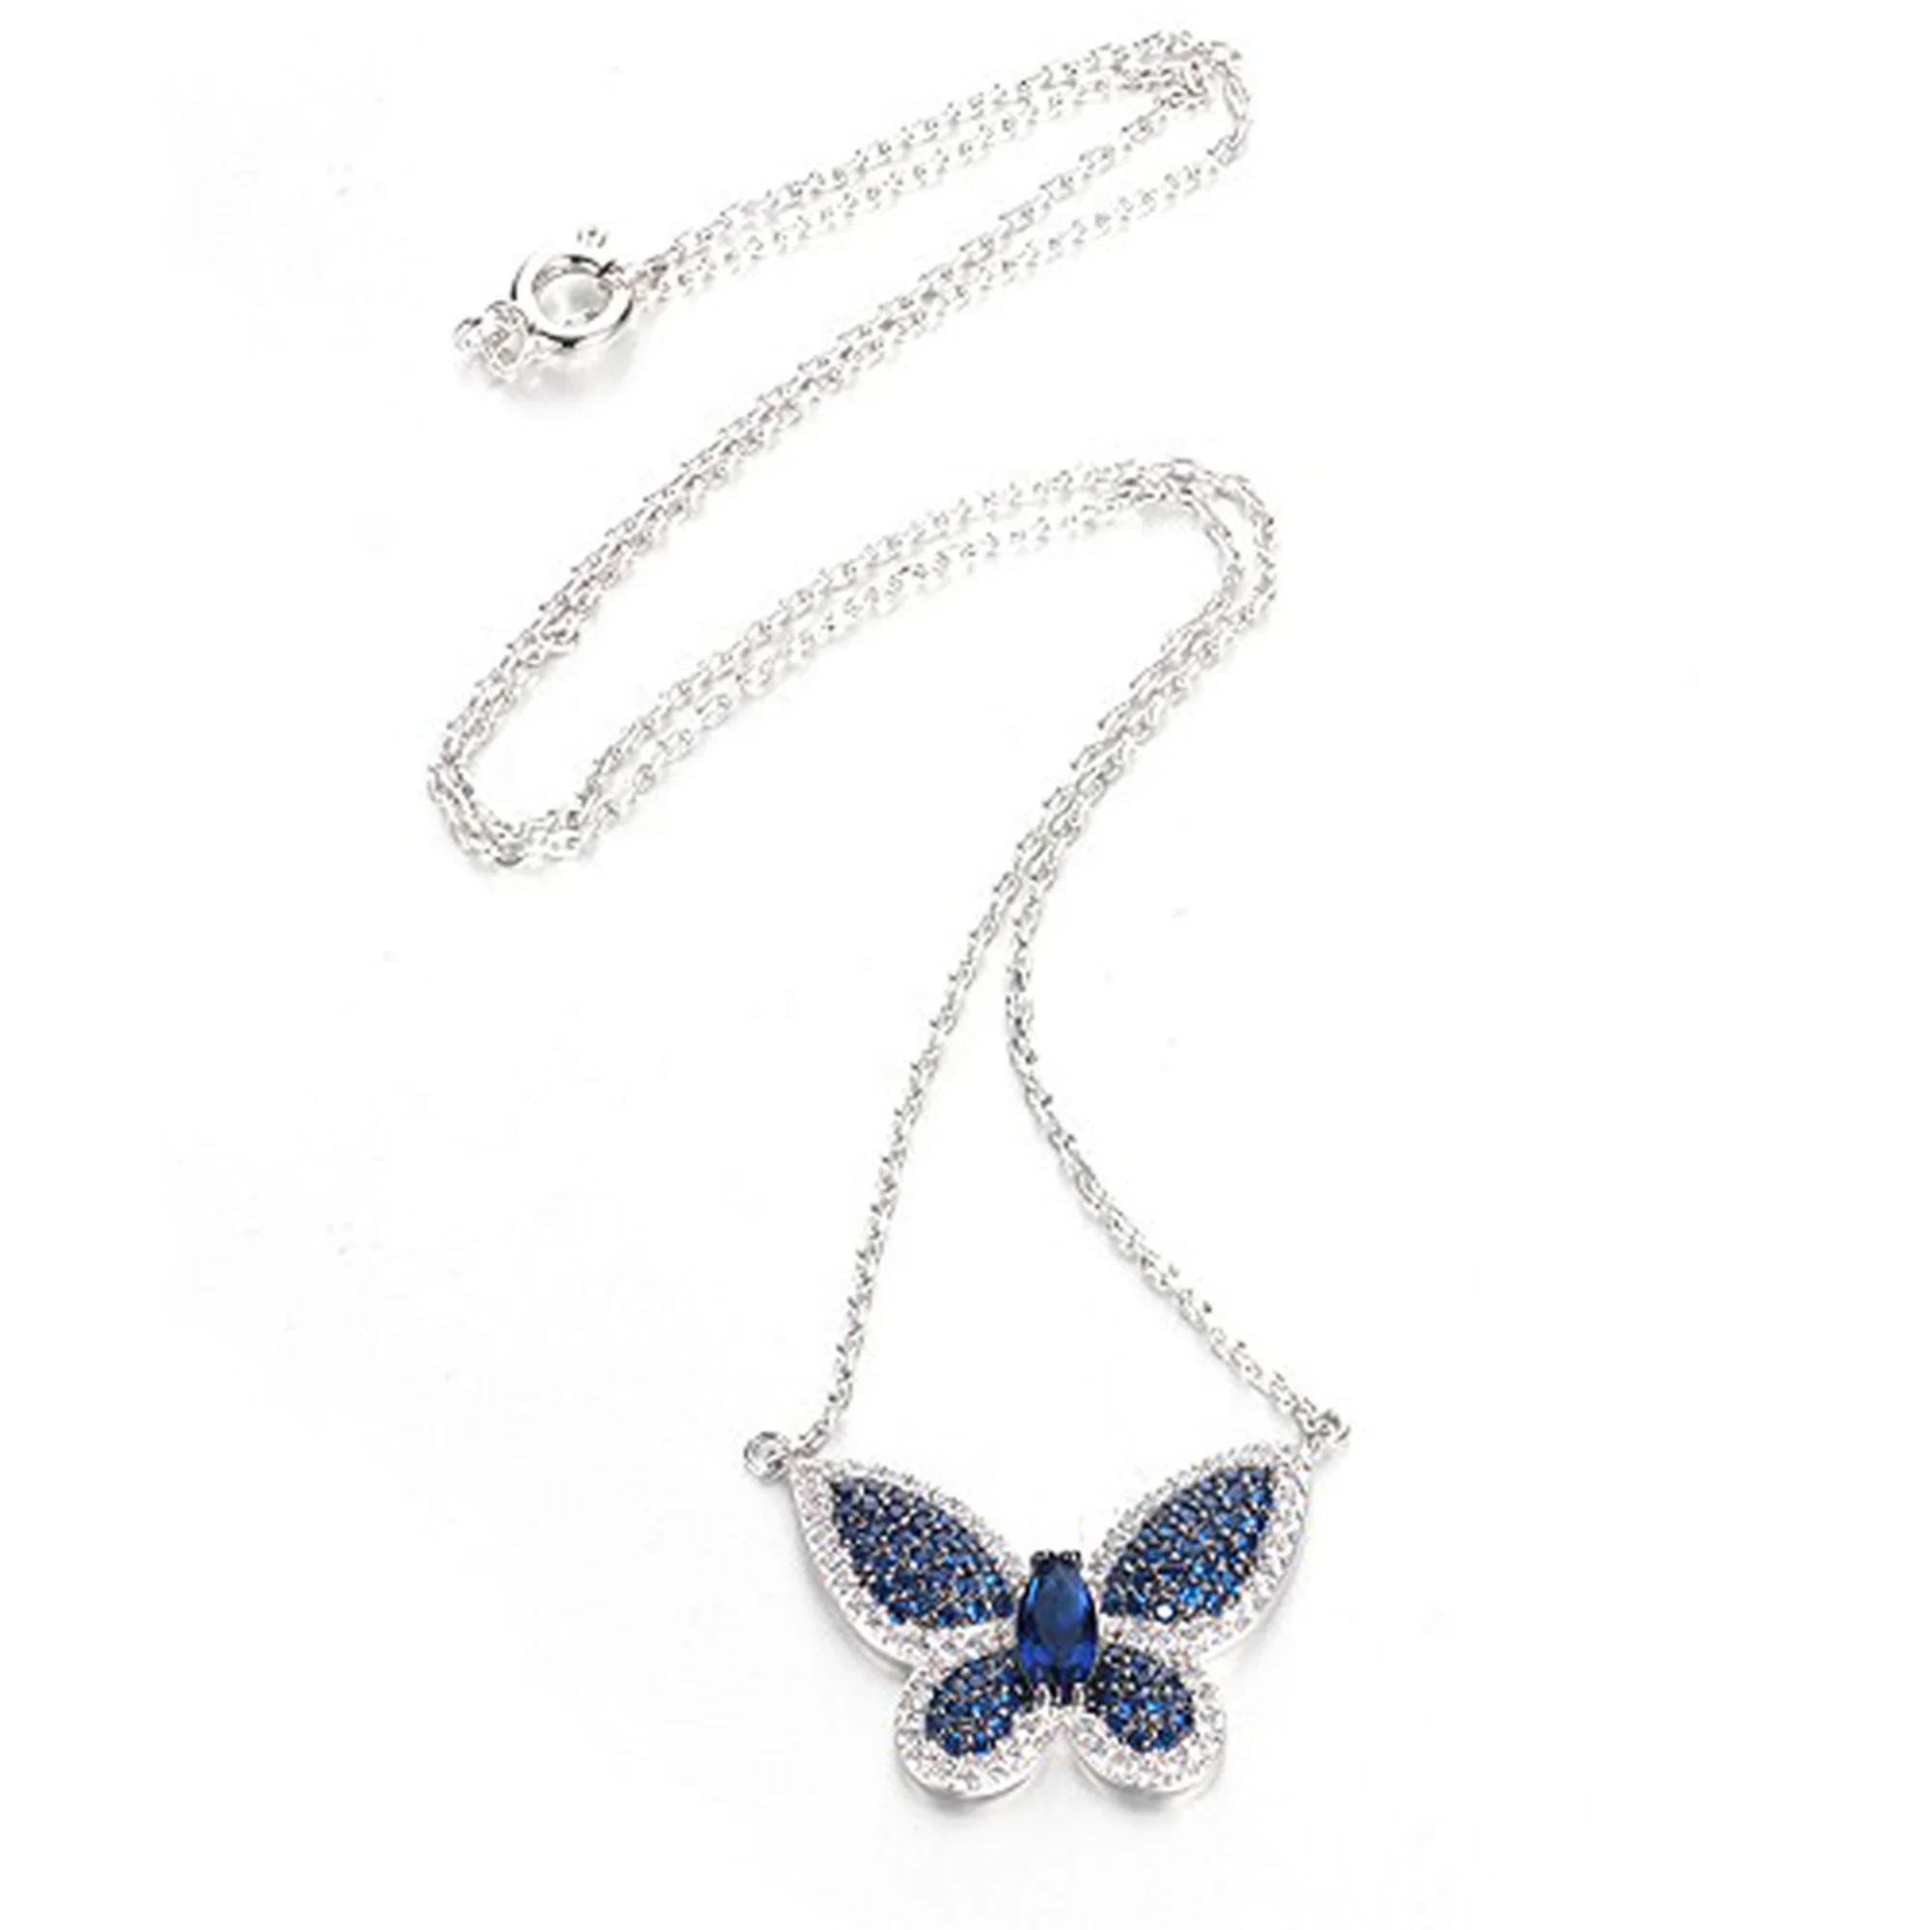 for Women silver chain butterfly pendant necklace Ladies CZ 925 sterling silver necklace pendant